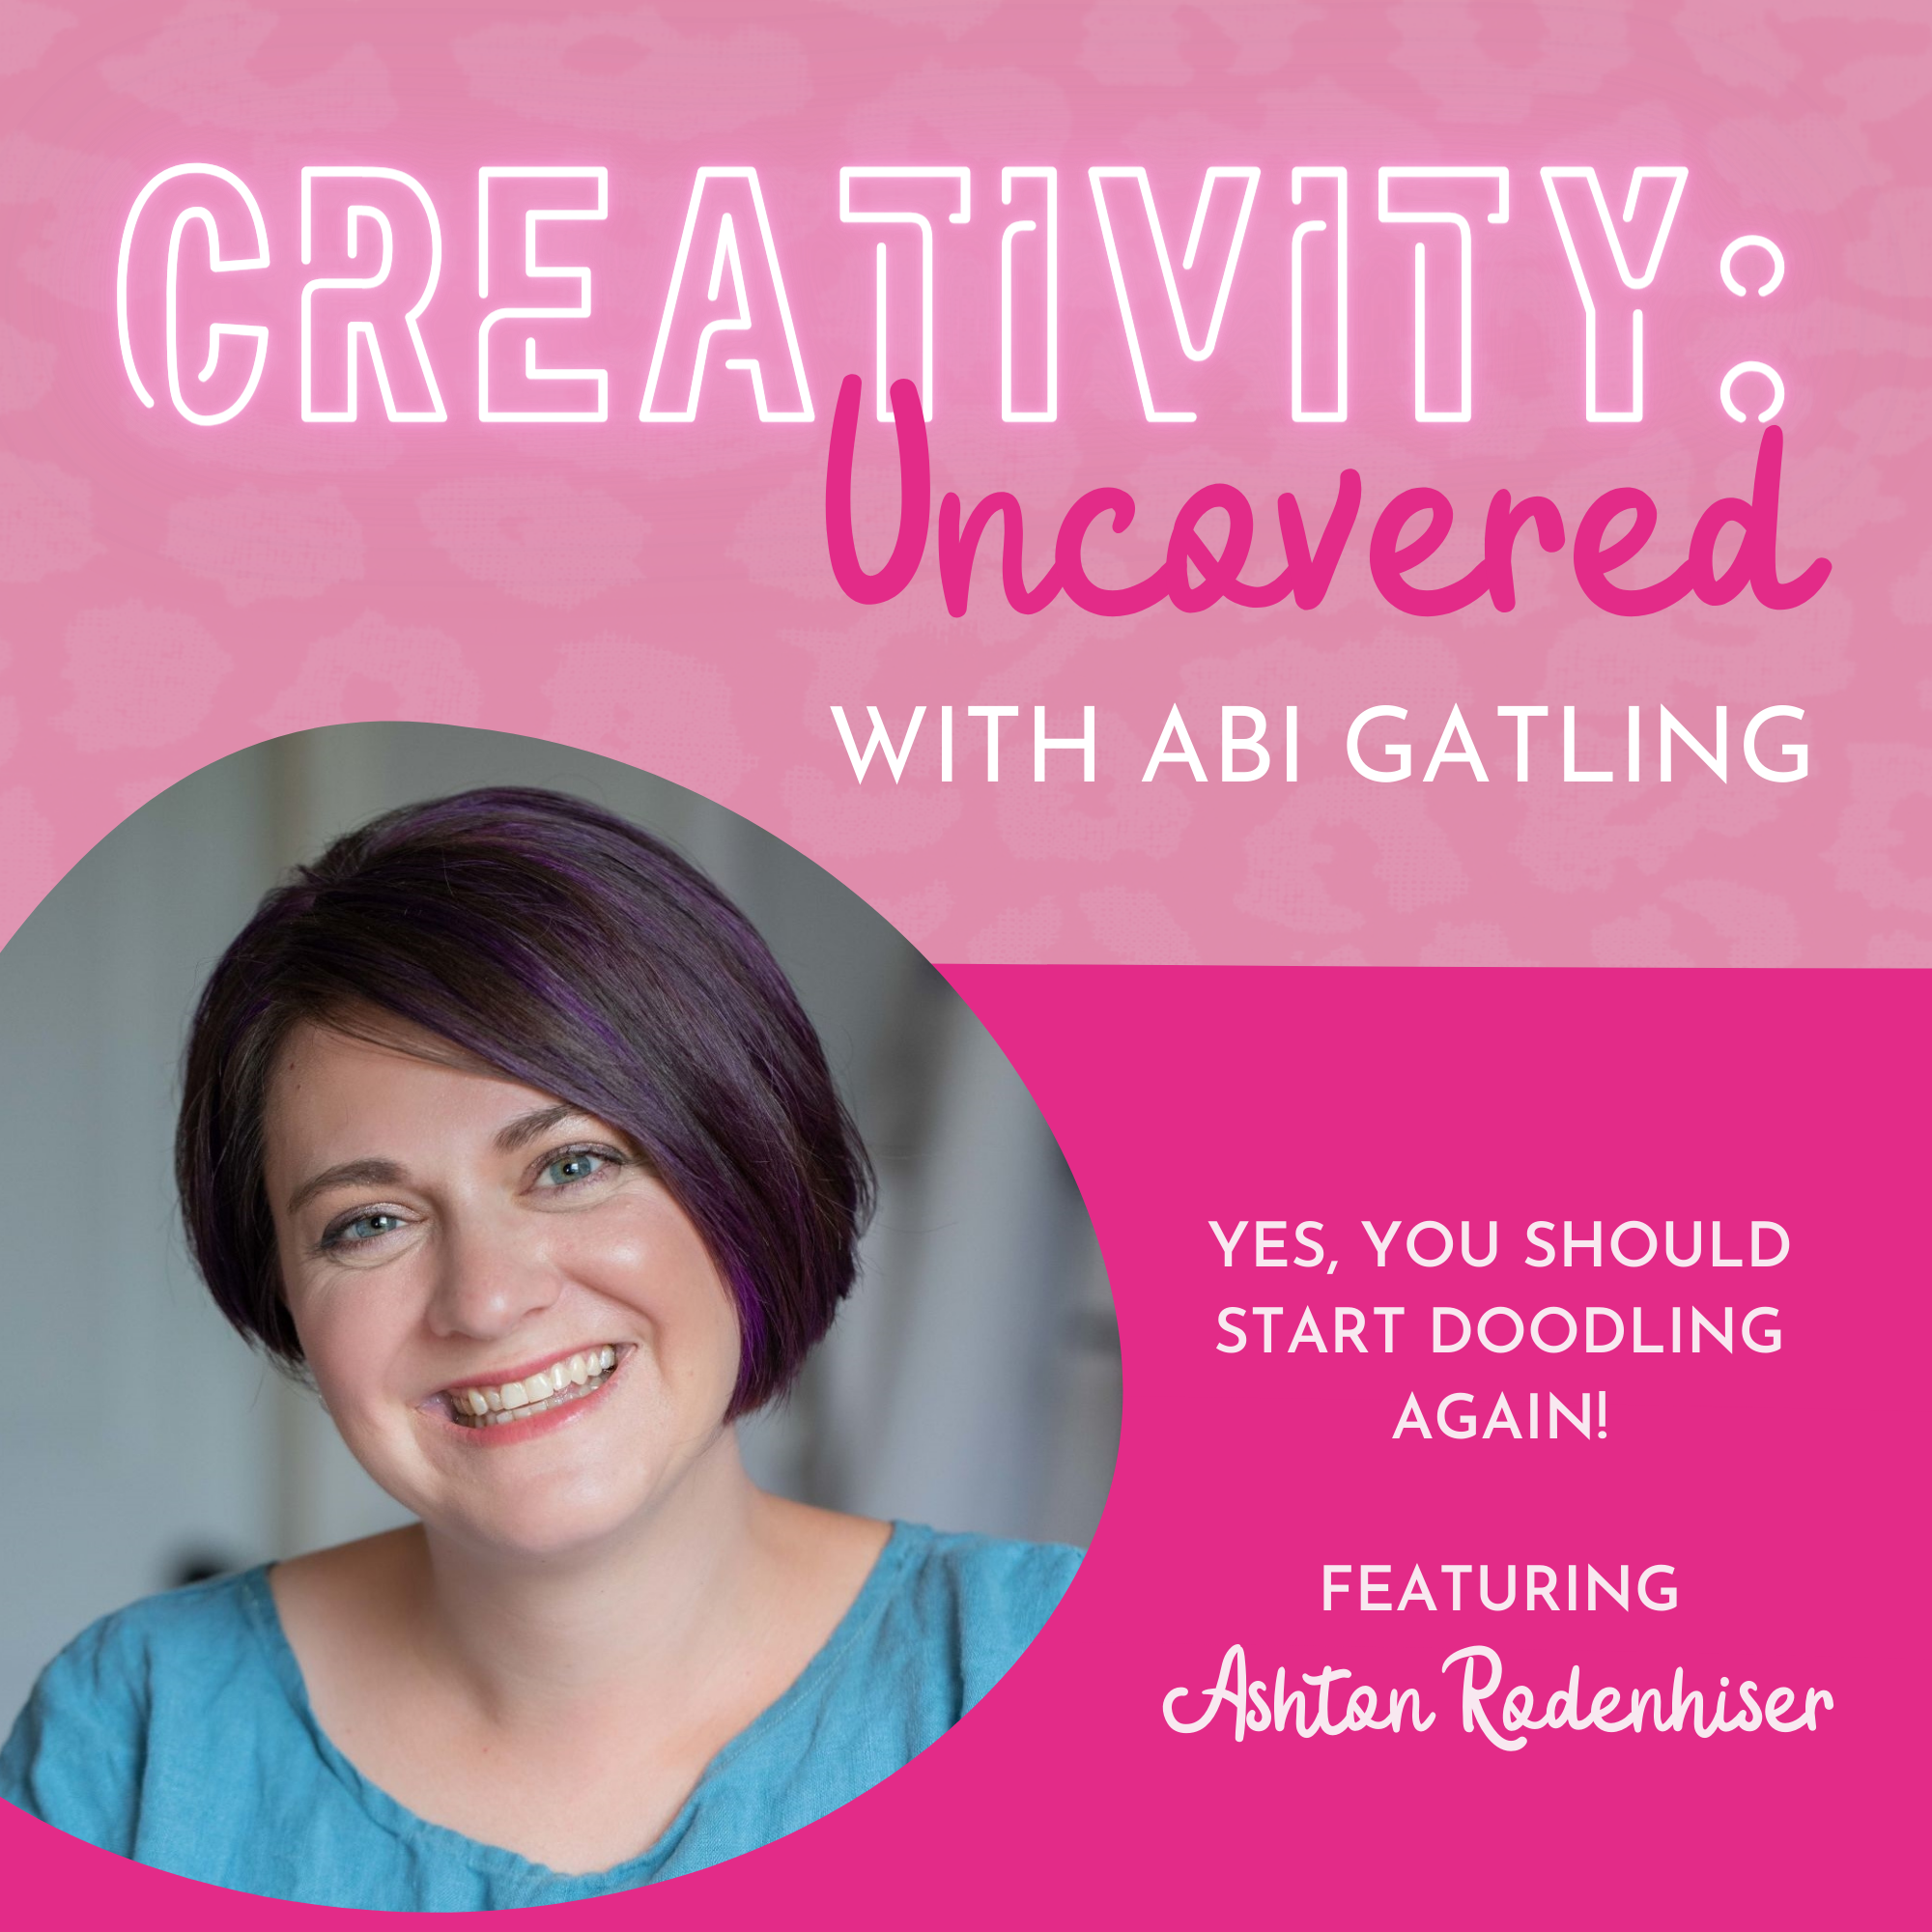 Creativity: Uncovered podcast episode graphic featuring guest Ashton Rodenhiser